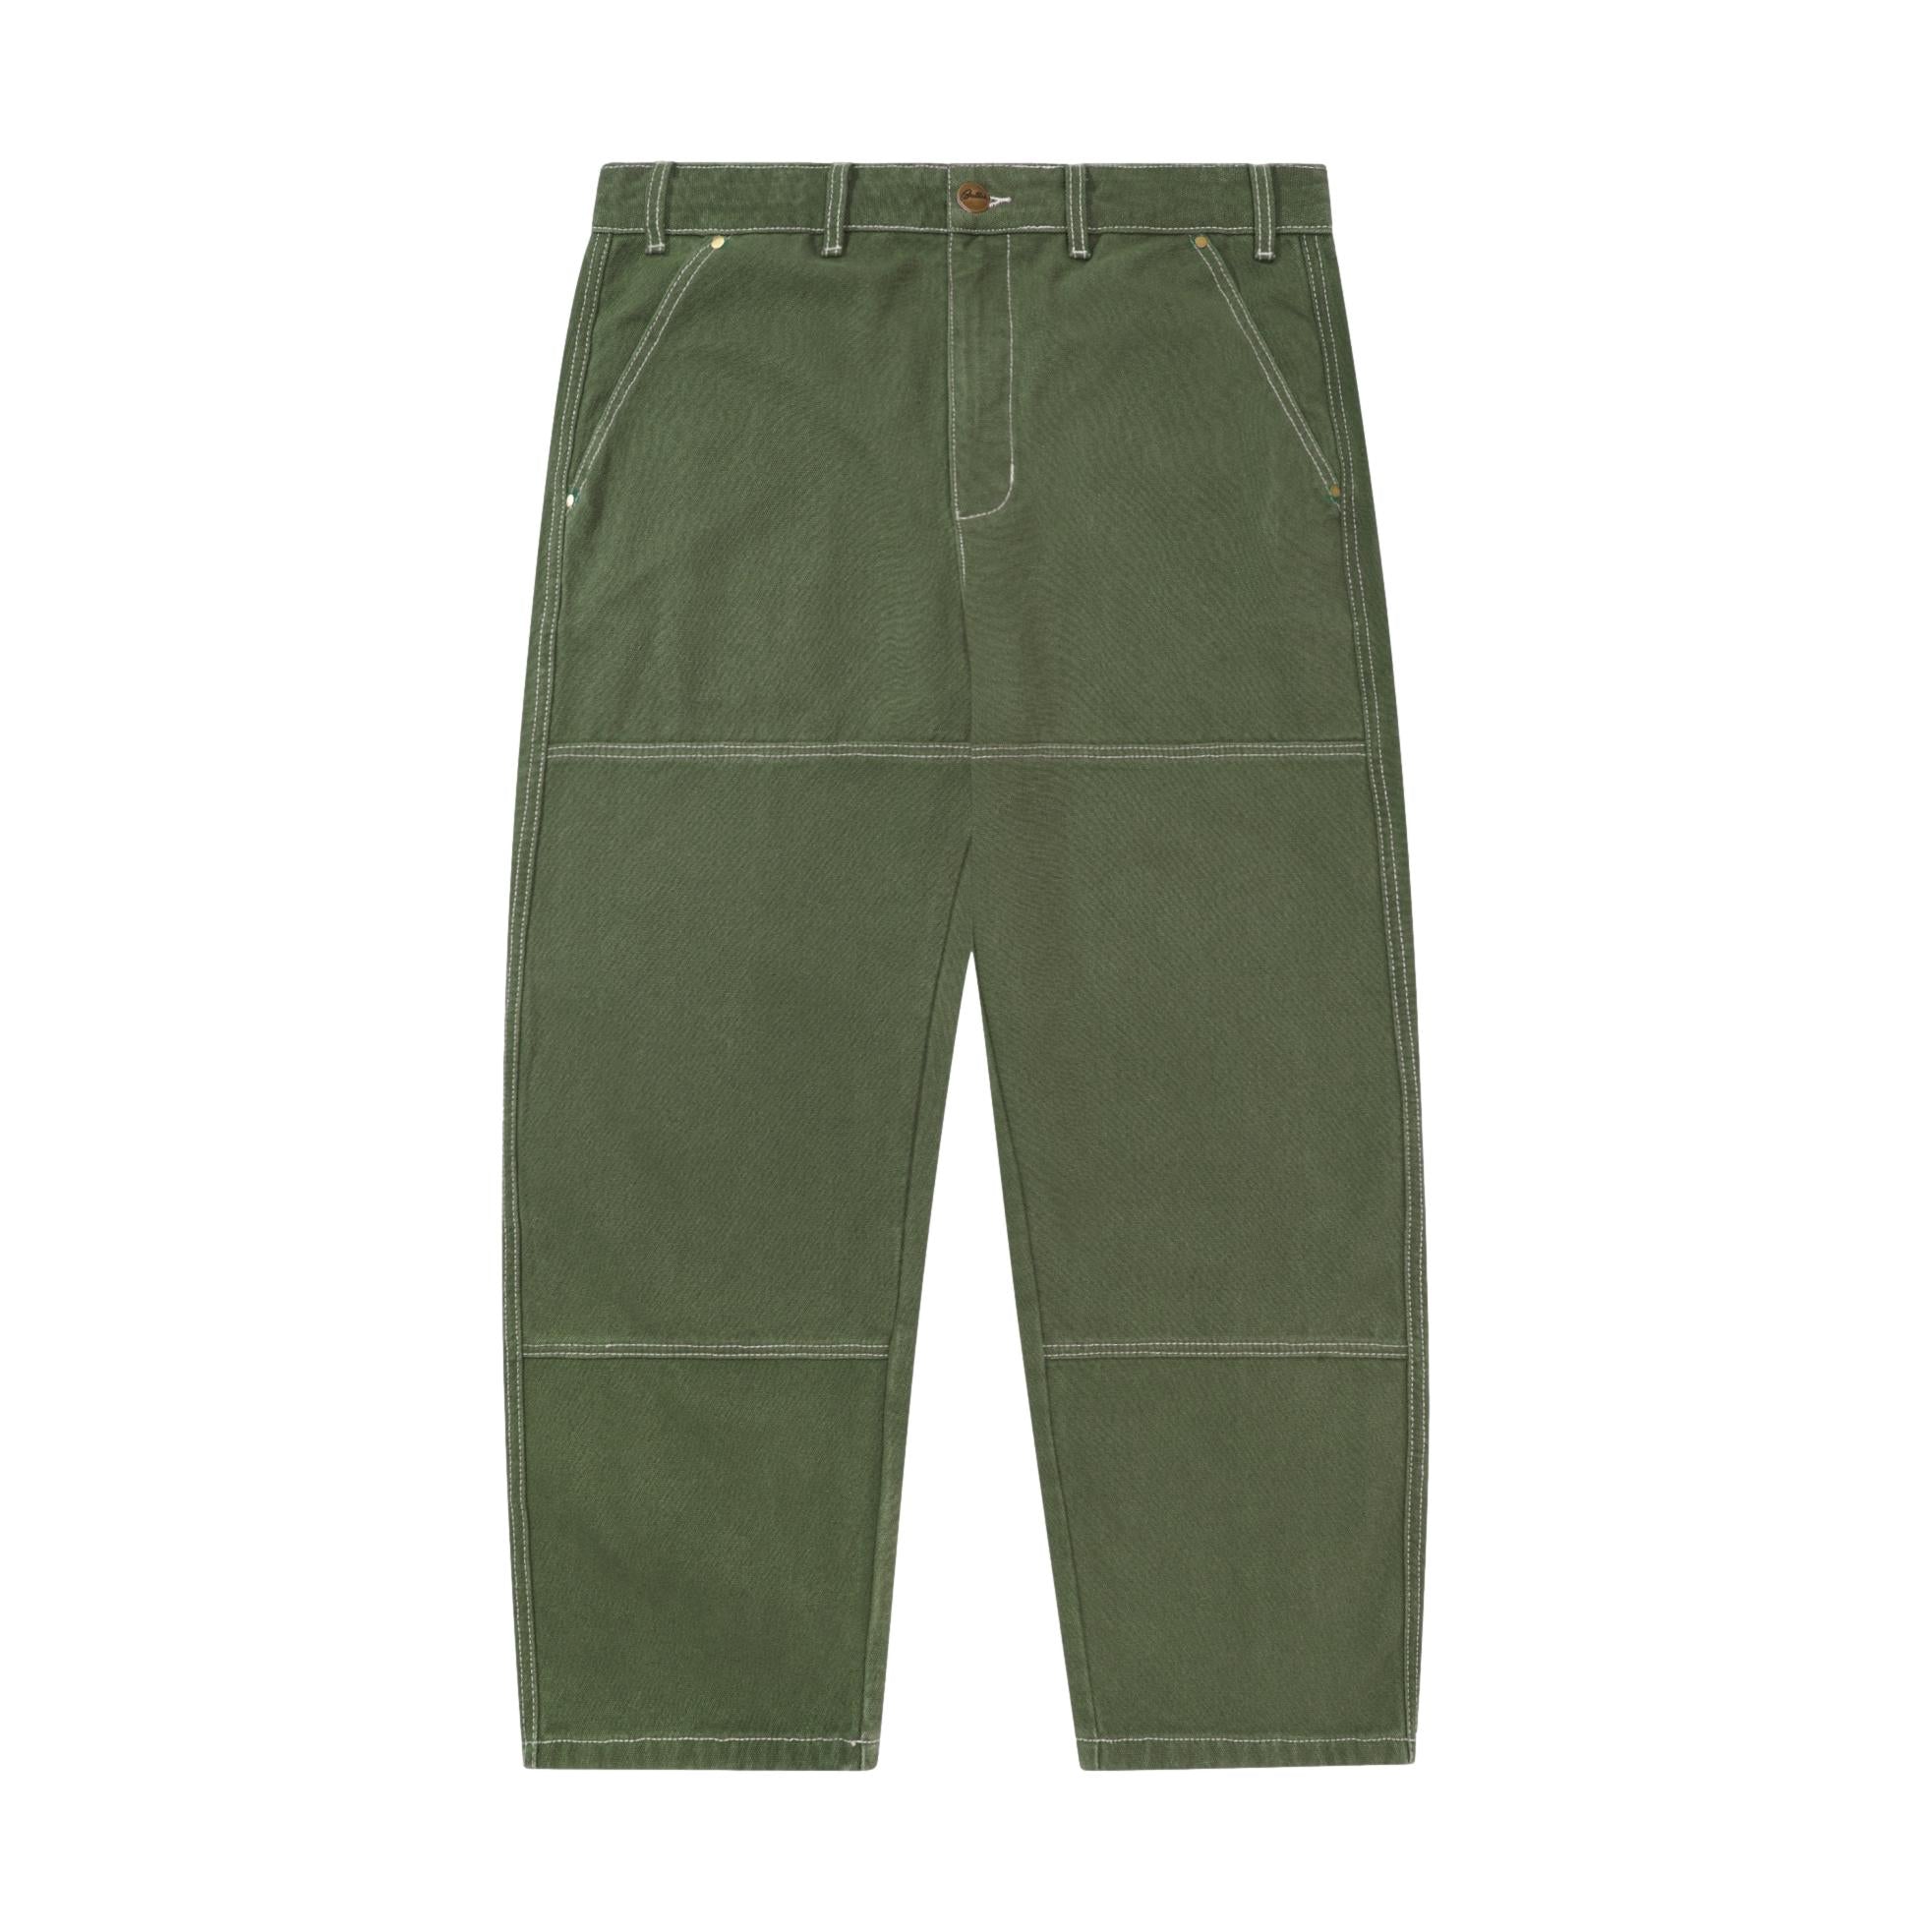 Butter Work Double Knee Pants Washed Army - Venue Skateboards